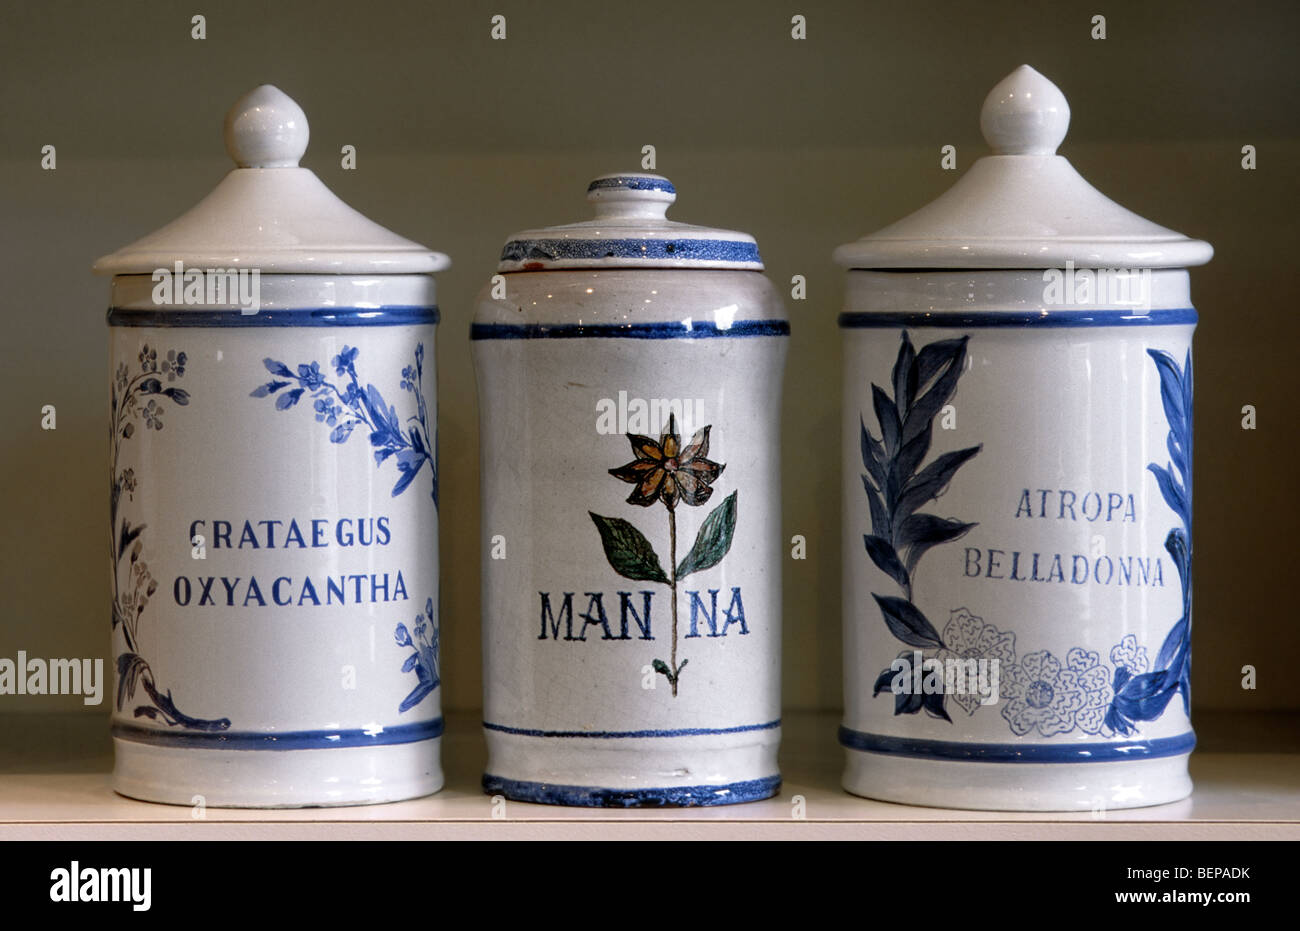 Old pharmacy Delftware pots with herbs as medicines in Latin on display Stock Photo